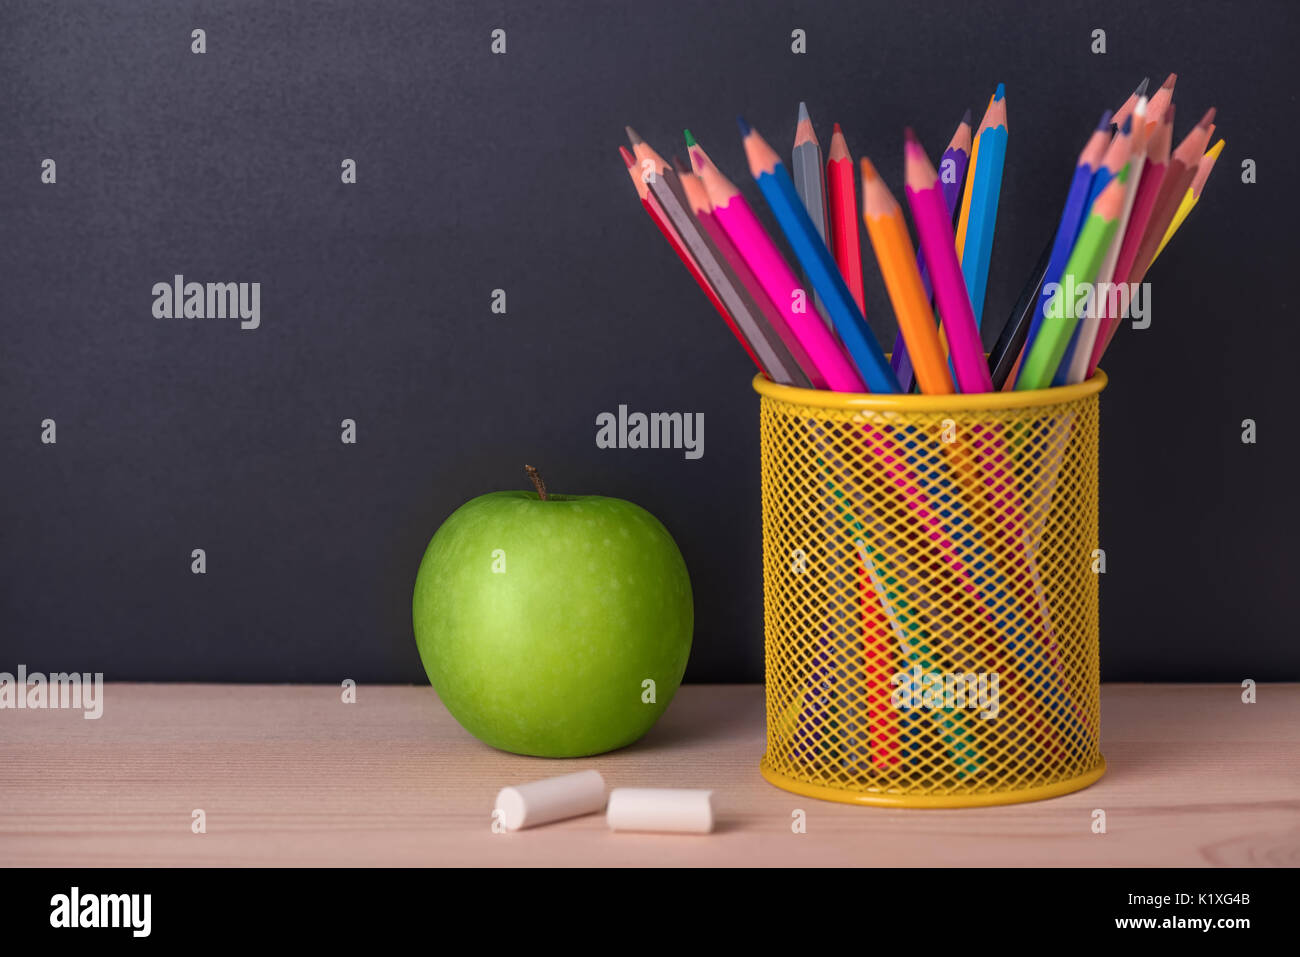 education concept with green apple, pencils, chalks over black chalkboard background, close up Stock Photo